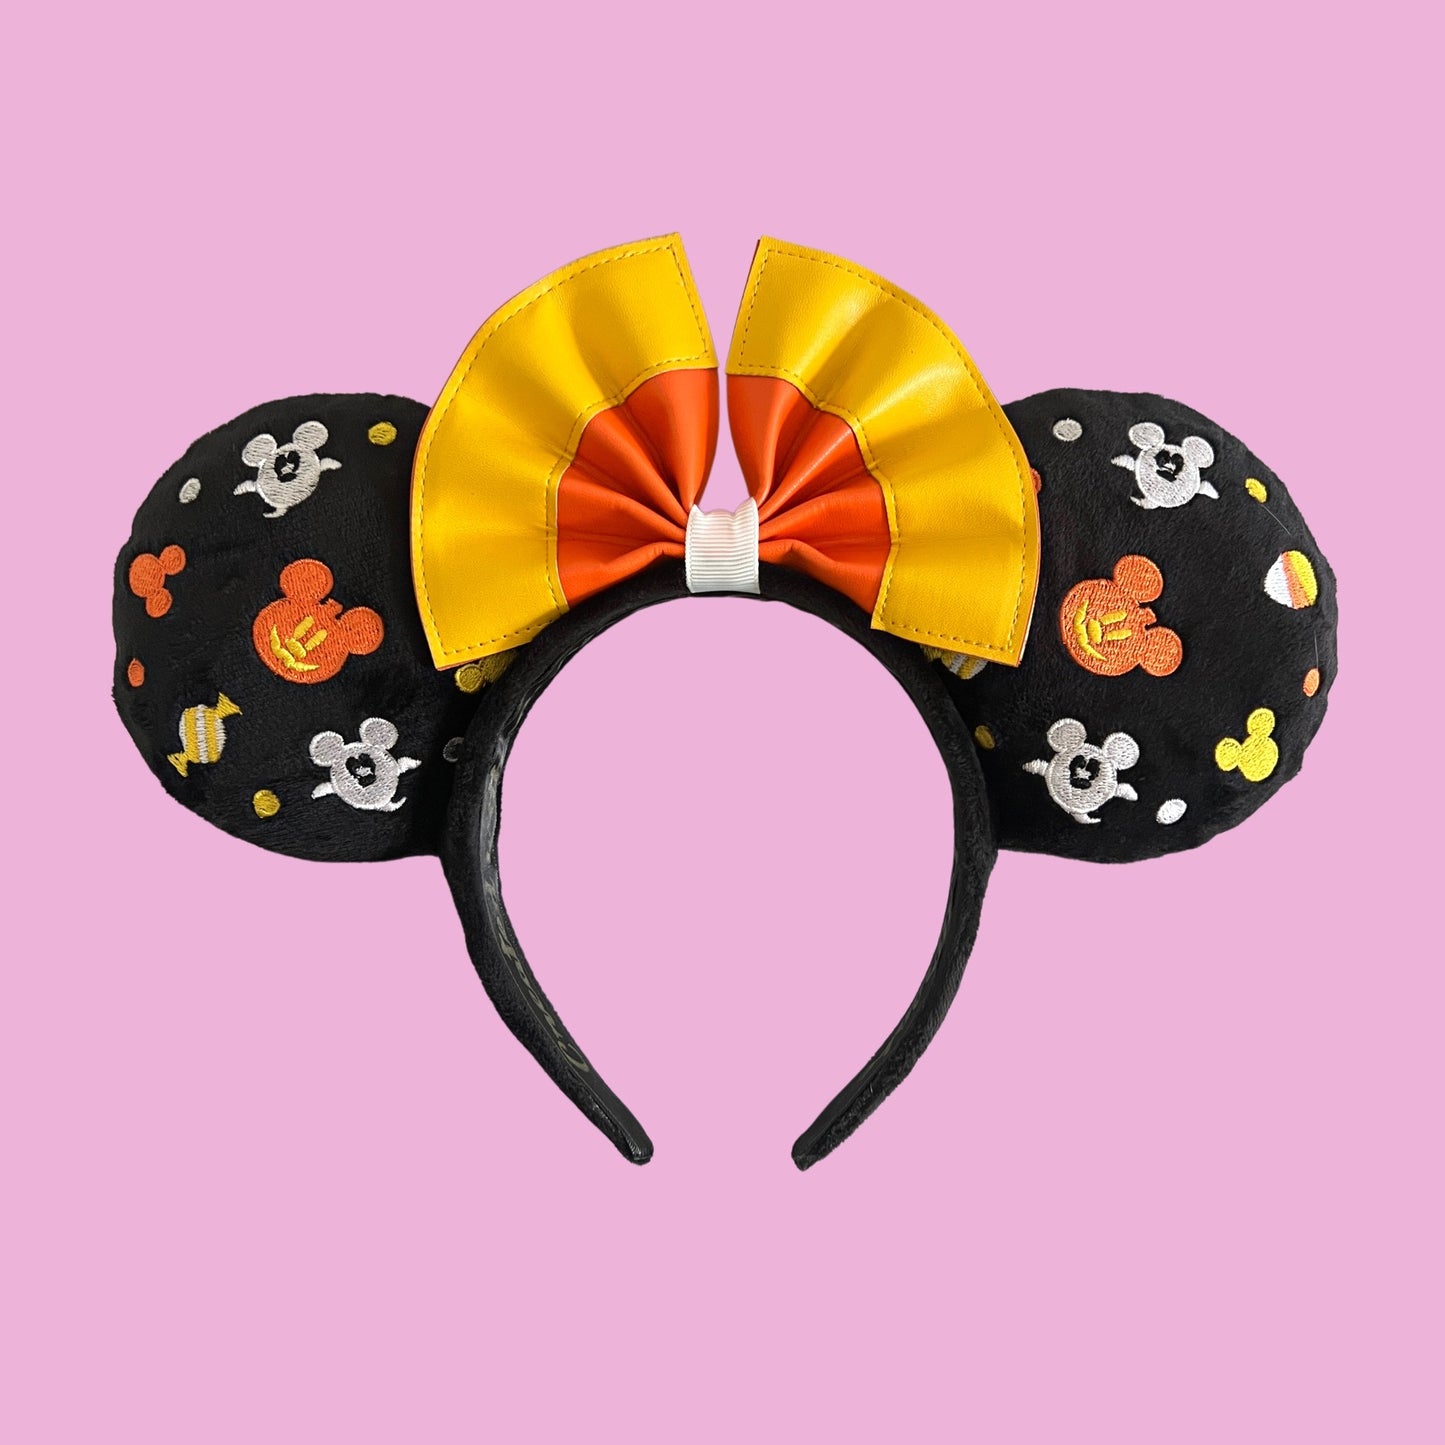 Embroidered Halloween Plush Minnie Mouse Ears